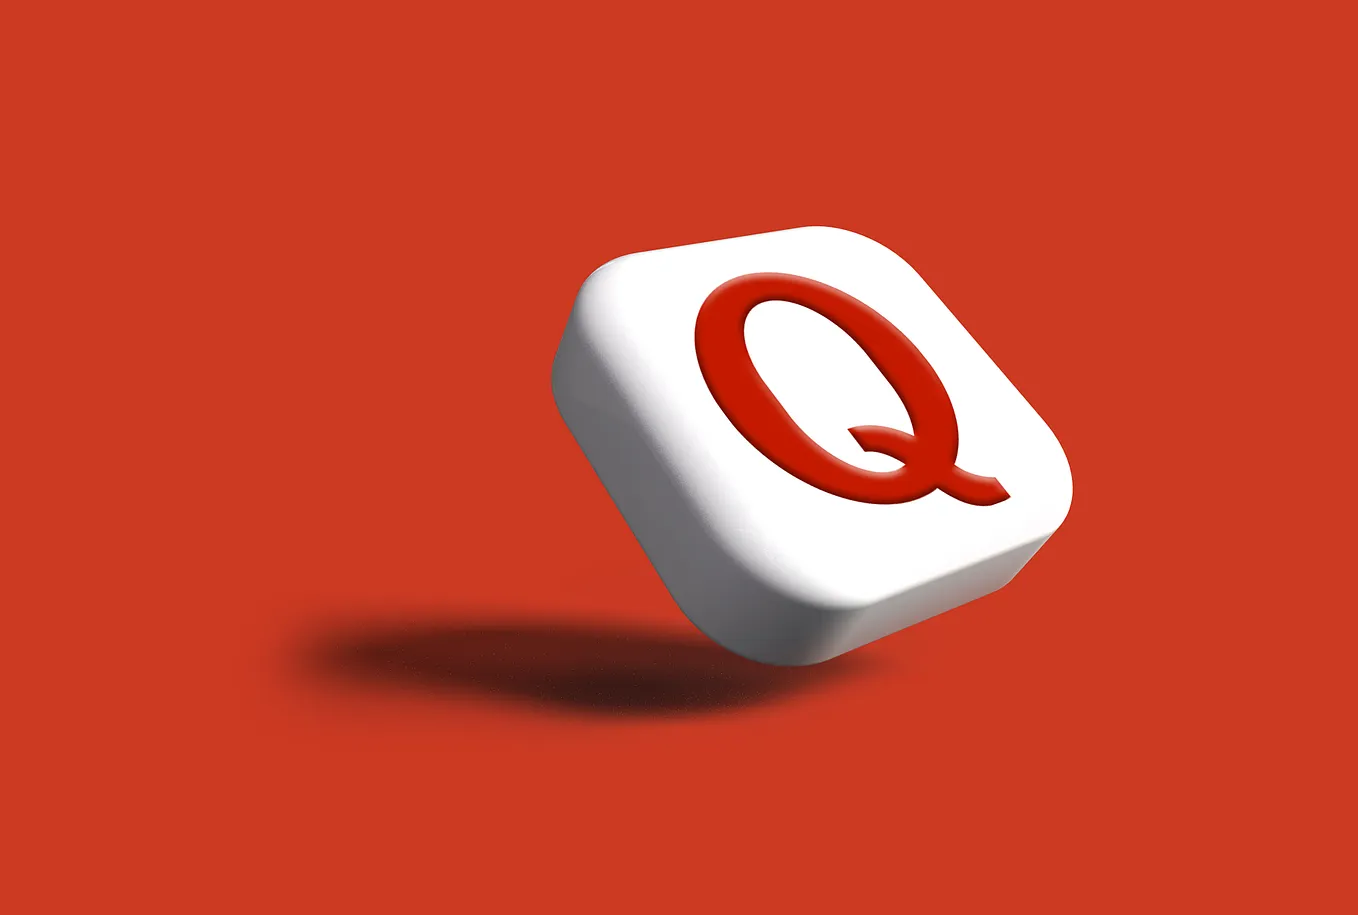 4 Hidden Quora Features to Go VIRAL That No One Uses